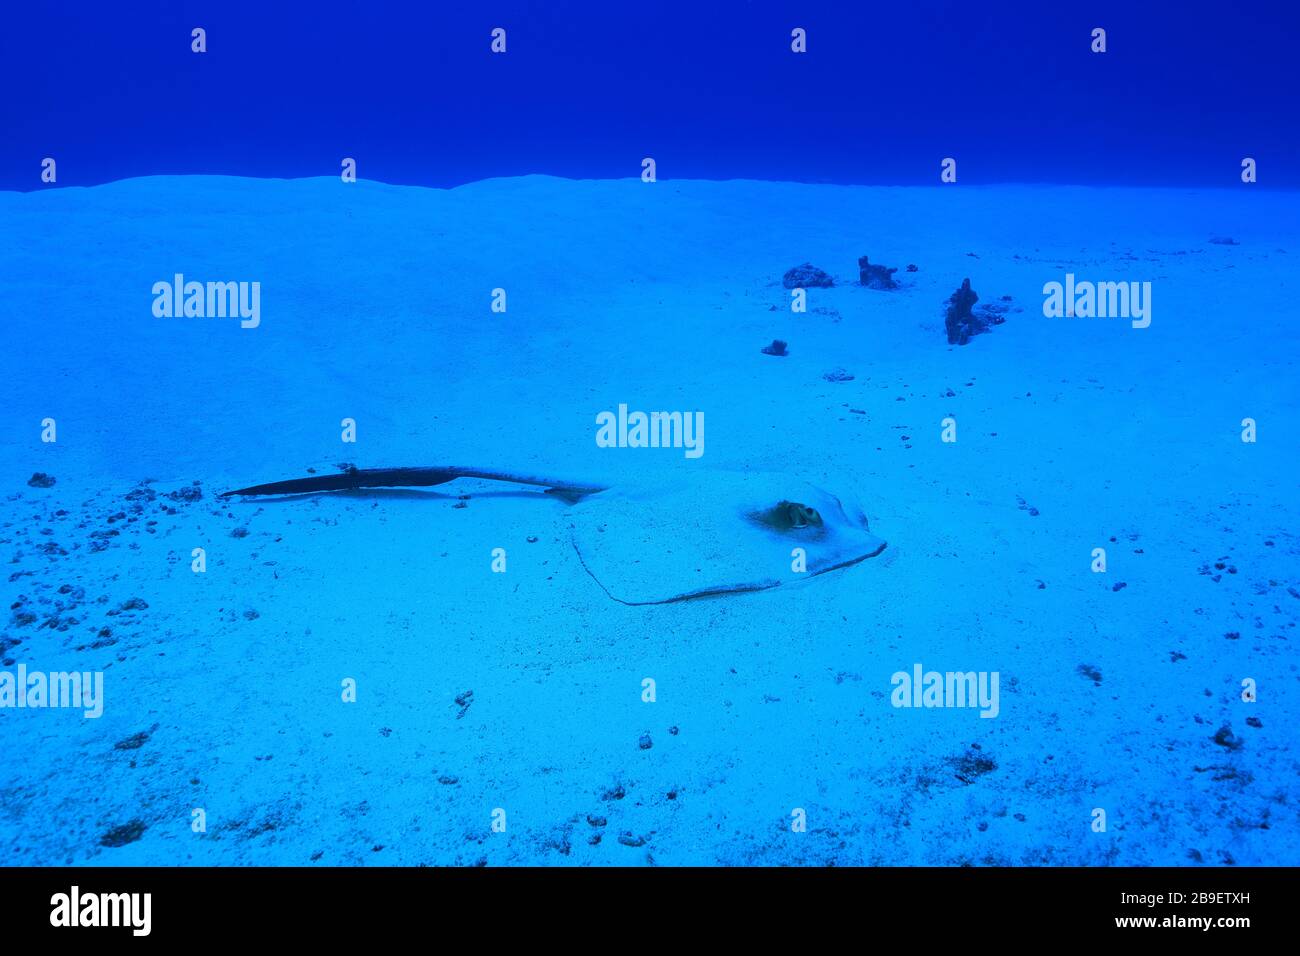 Chowtail stingray (Pastinachus sephen) underwater in the tropical waters of the Indian Ocean Stock Photo